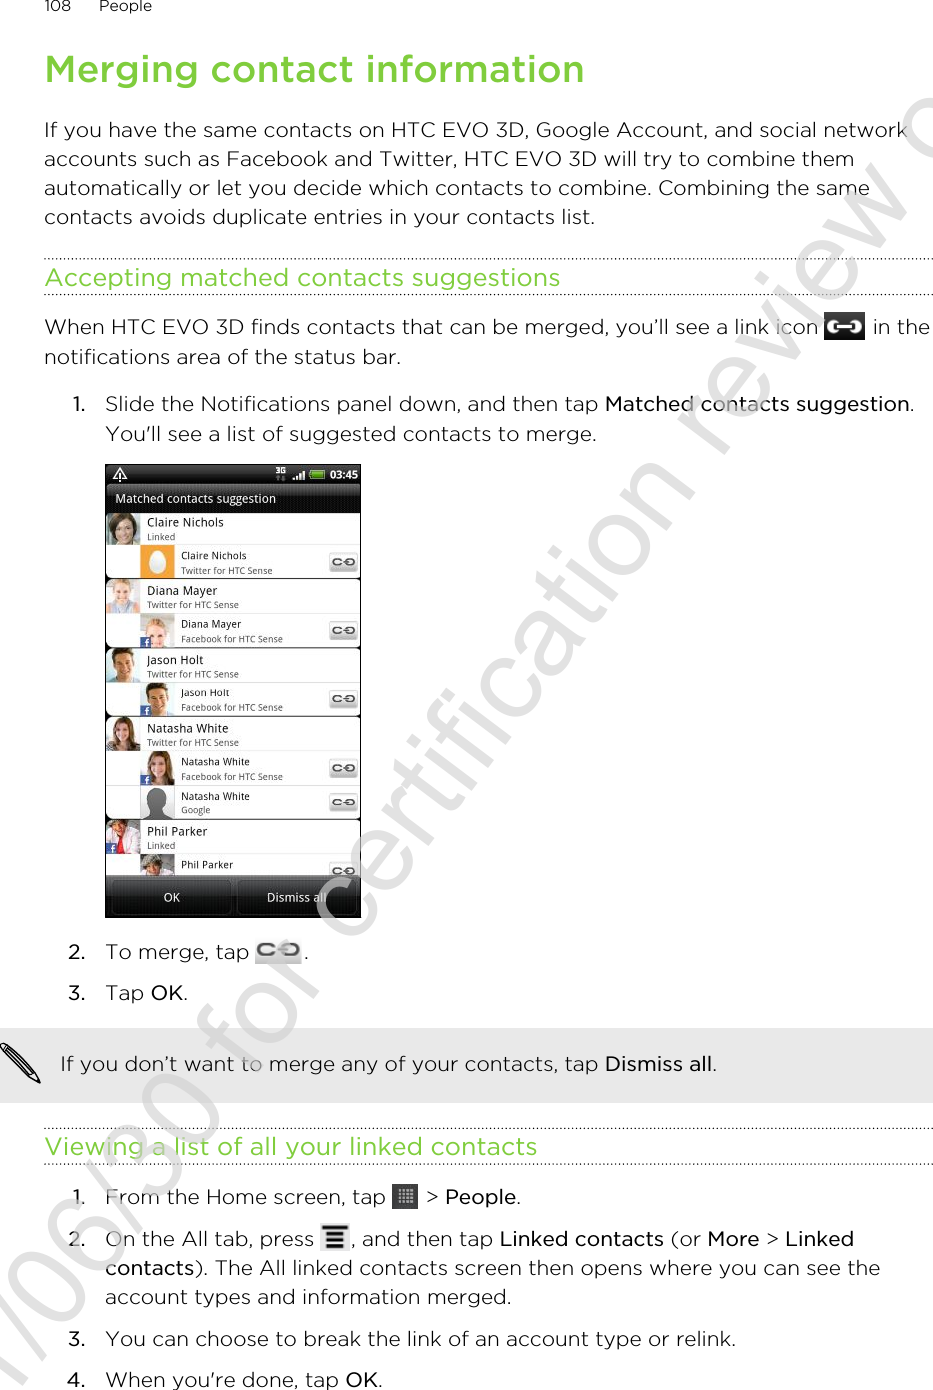 Merging contact informationIf you have the same contacts on HTC EVO 3D, Google Account, and social networkaccounts such as Facebook and Twitter, HTC EVO 3D will try to combine themautomatically or let you decide which contacts to combine. Combining the samecontacts avoids duplicate entries in your contacts list.Accepting matched contacts suggestionsWhen HTC EVO 3D finds contacts that can be merged, you’ll see a link icon   in thenotifications area of the status bar.1. Slide the Notifications panel down, and then tap Matched contacts suggestion.You&apos;ll see a list of suggested contacts to merge.2. To merge, tap  .3. Tap OK.If you don’t want to merge any of your contacts, tap Dismiss all.Viewing a list of all your linked contacts1. From the Home screen, tap   &gt; People.2. On the All tab, press  , and then tap Linked contacts (or More &gt; Linkedcontacts). The All linked contacts screen then opens where you can see theaccount types and information merged.3. You can choose to break the link of an account type or relink.4. When you&apos;re done, tap OK.108 People2011/06/30 for certification review only